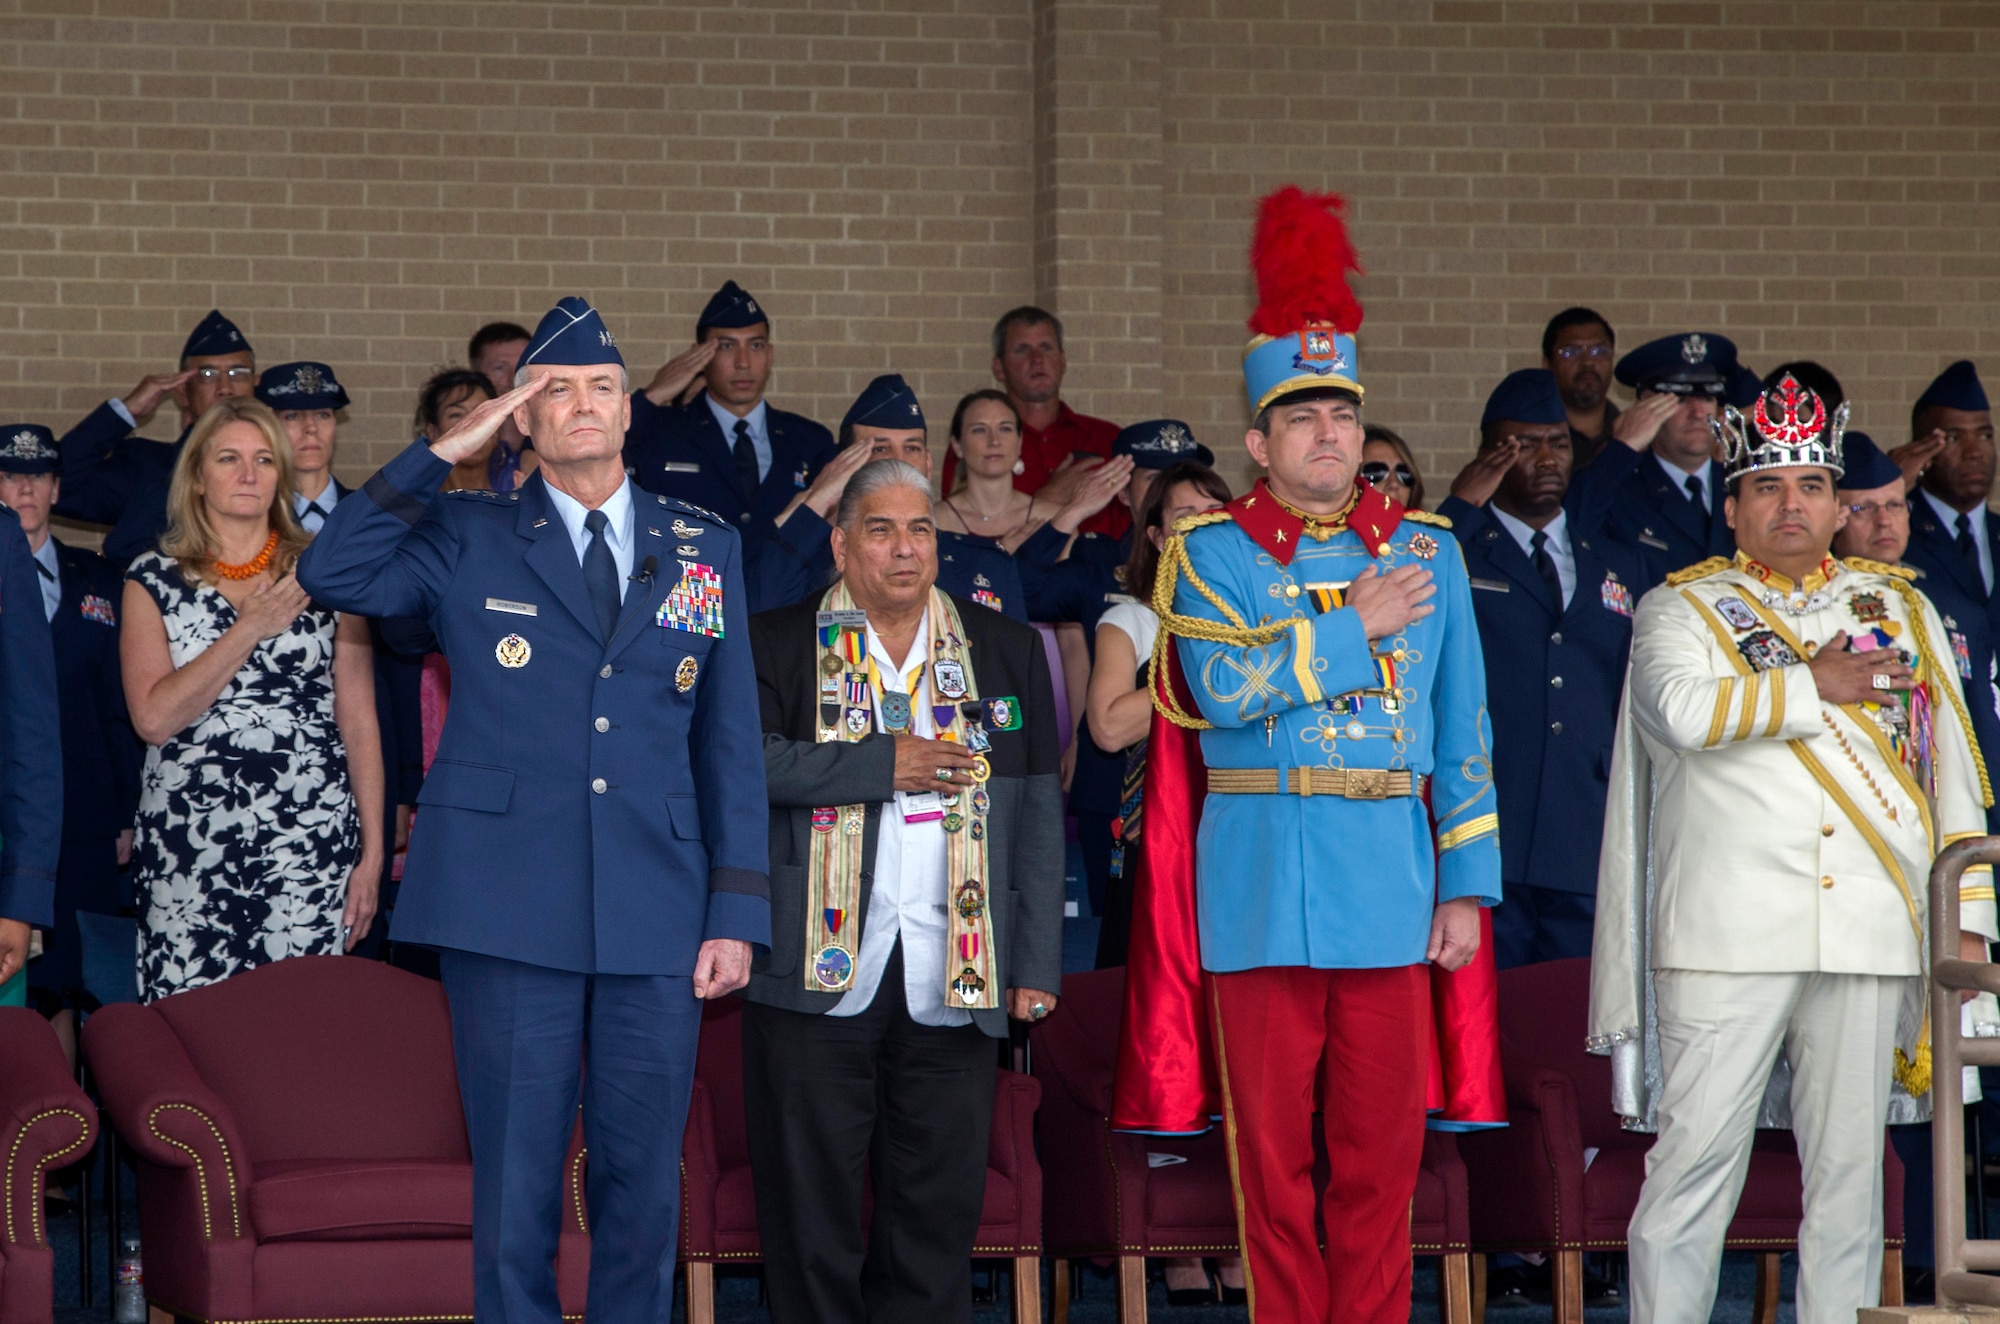 U.S. Air Force Lt. Gen. Darryl Roberson, commander Air Education and Training command, salutes Basic Military Training graduates alongside the 2017 Fiesta Royalty April 21, 2017 at the Graduation Parade at Lackland Air Force Base, T.X. This year marks the 126th anniversary of the colorful Fiesta festivity, honoring traditions deeply rooted throughout the area and celebrating the historic partnerships between the Airmen of Joint Base San Antonio and the local community. (U.S. Air Force photo by Johnny Saldivar) 